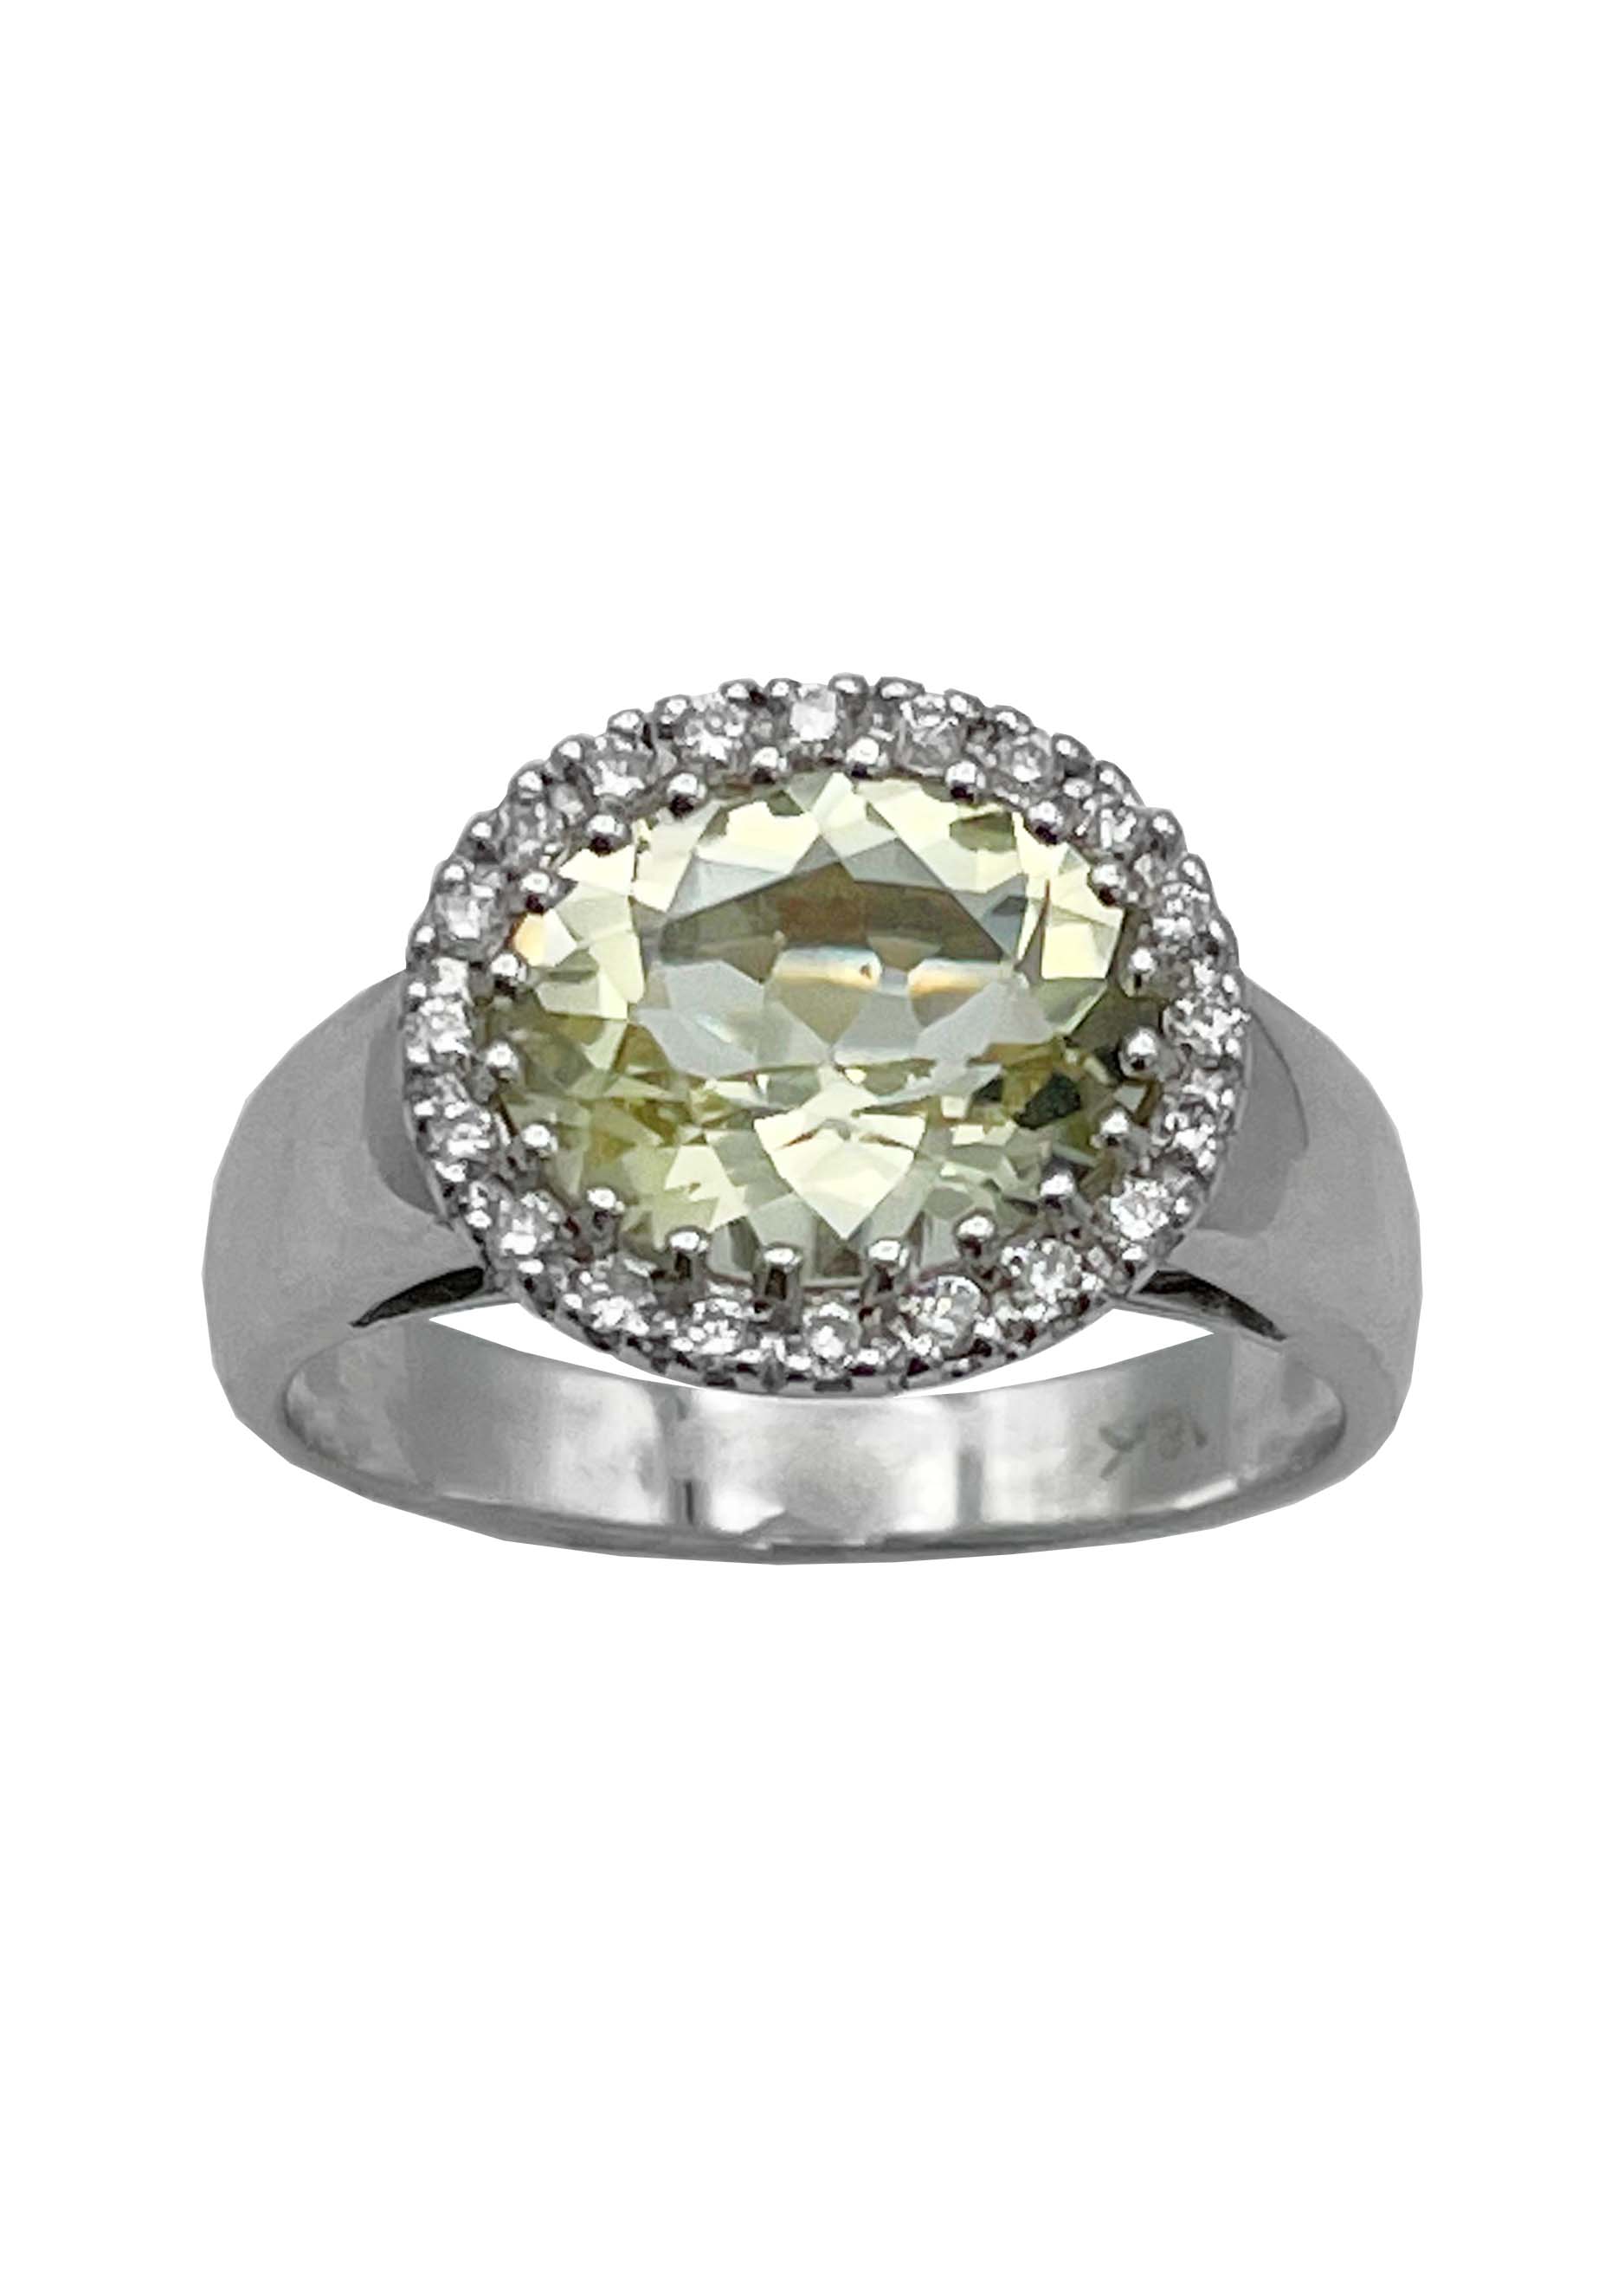 18k White Gold Oval Citrine Ring with Diamonds Image